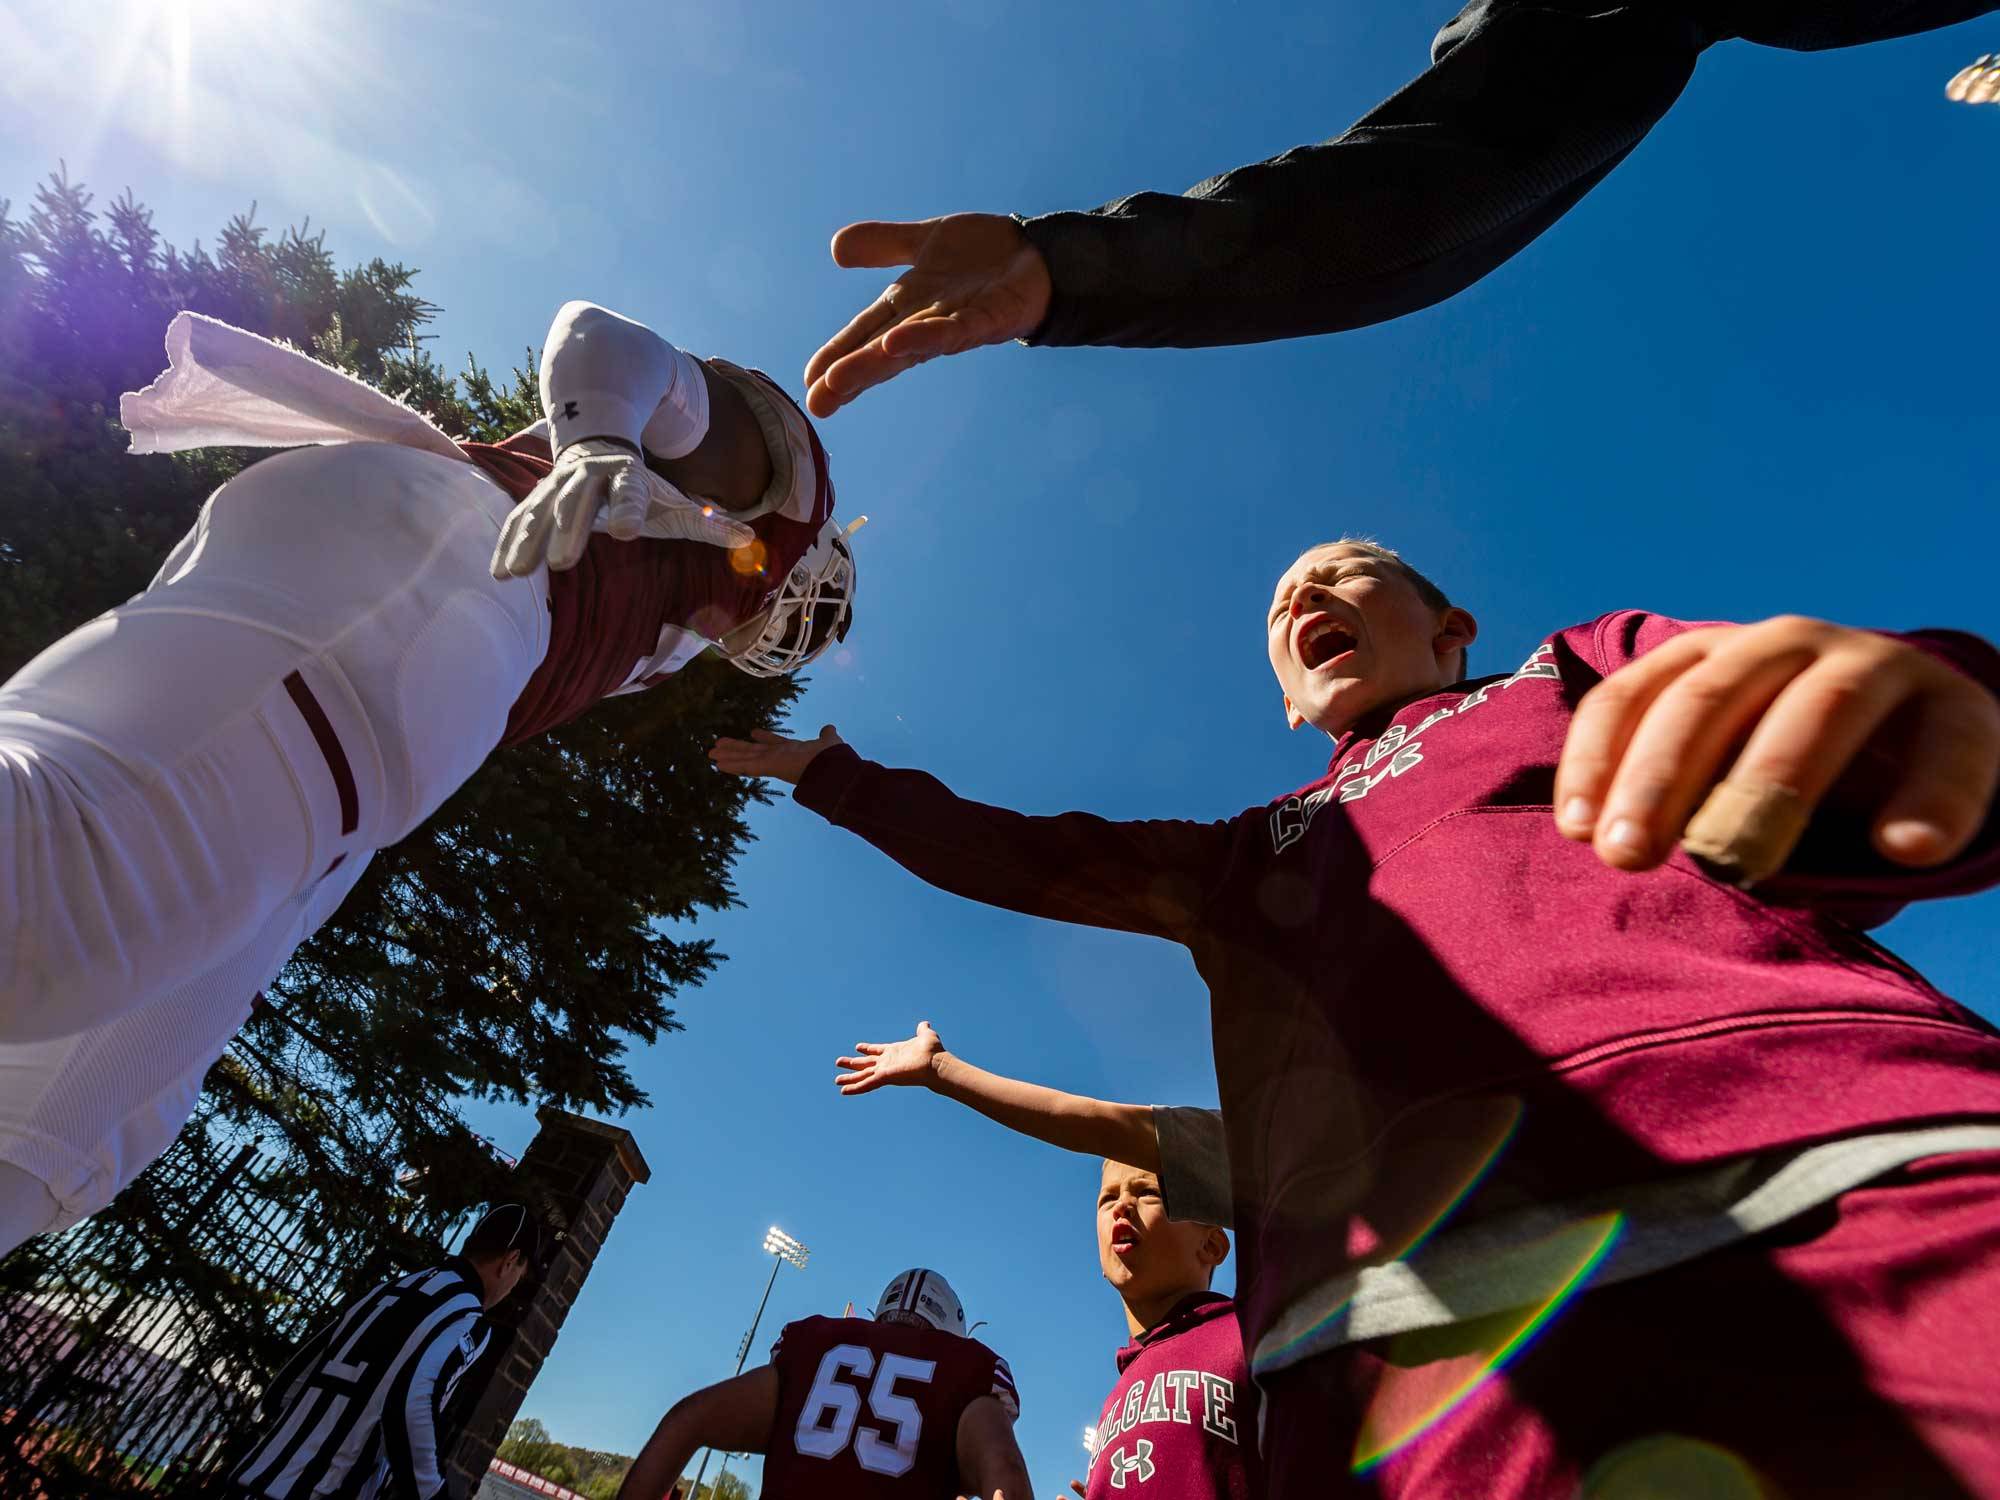 fans give high-fives to football players